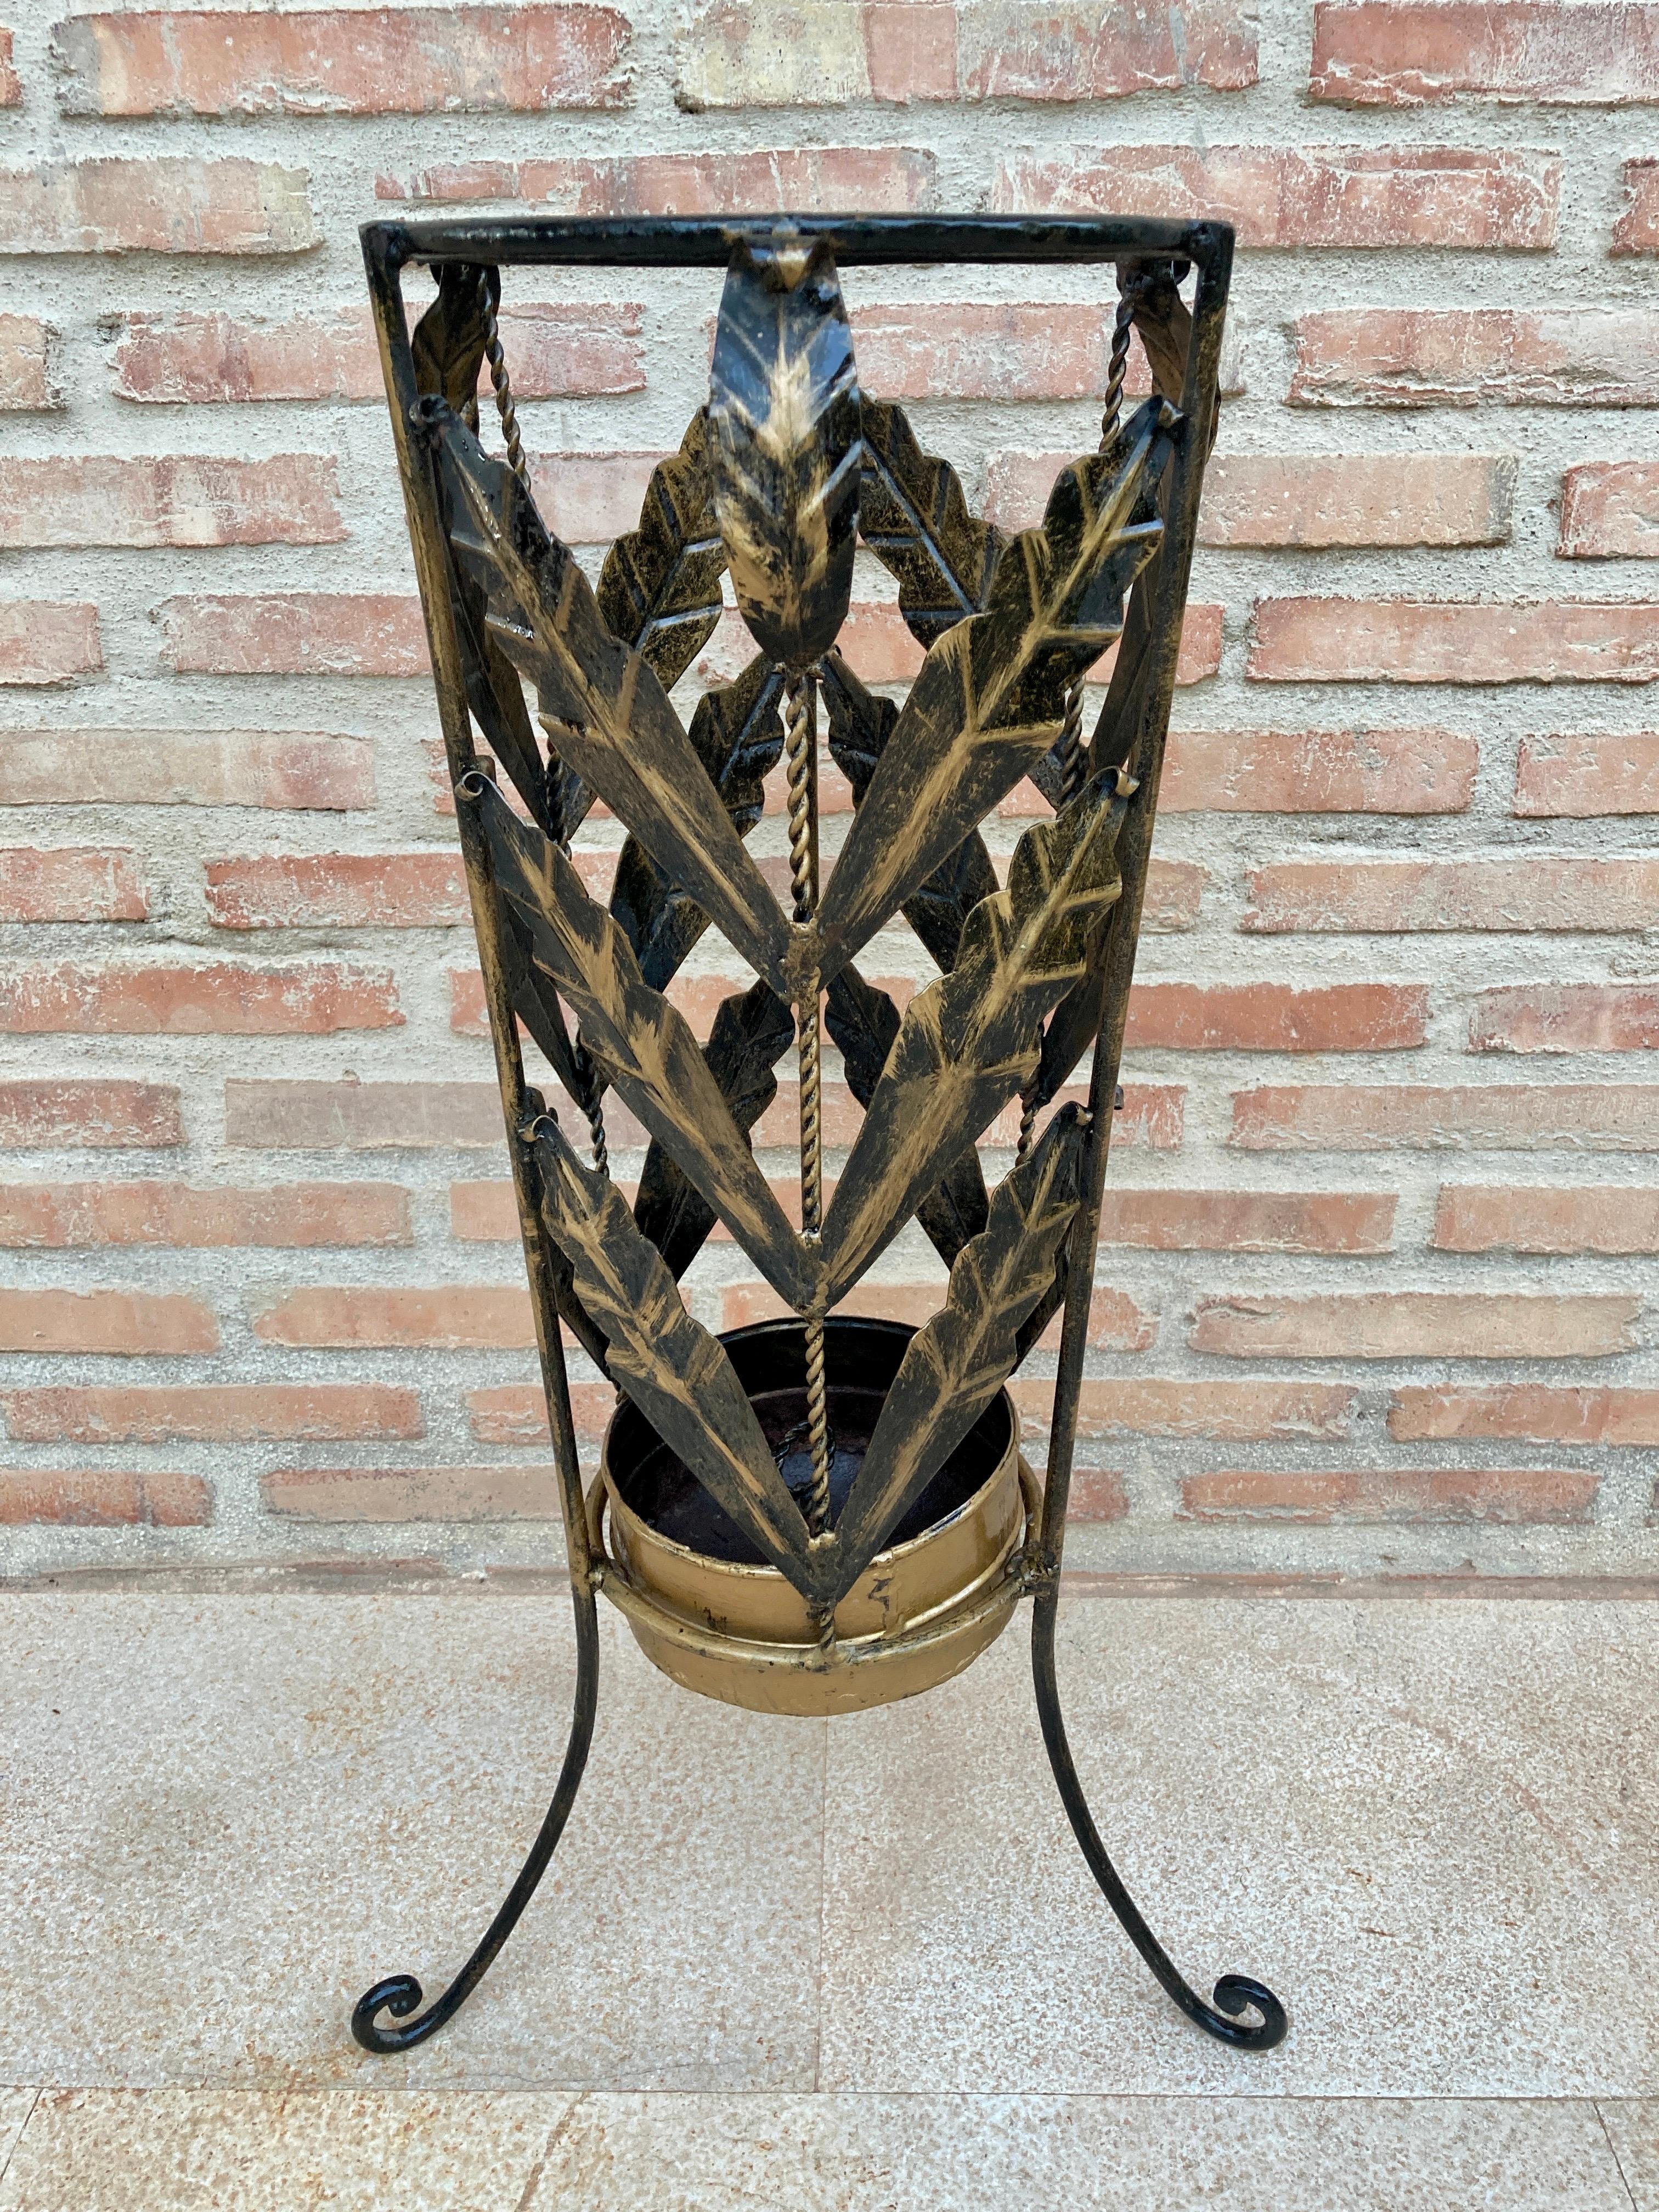 Antique metal umbrella stand from the 60's. Perfect to put in our entrance hall. 
Made by hand, along the umbrella stand we can see the shape of leaves intertwined with each other.

Condition report:

Good condition. This vintage item has no